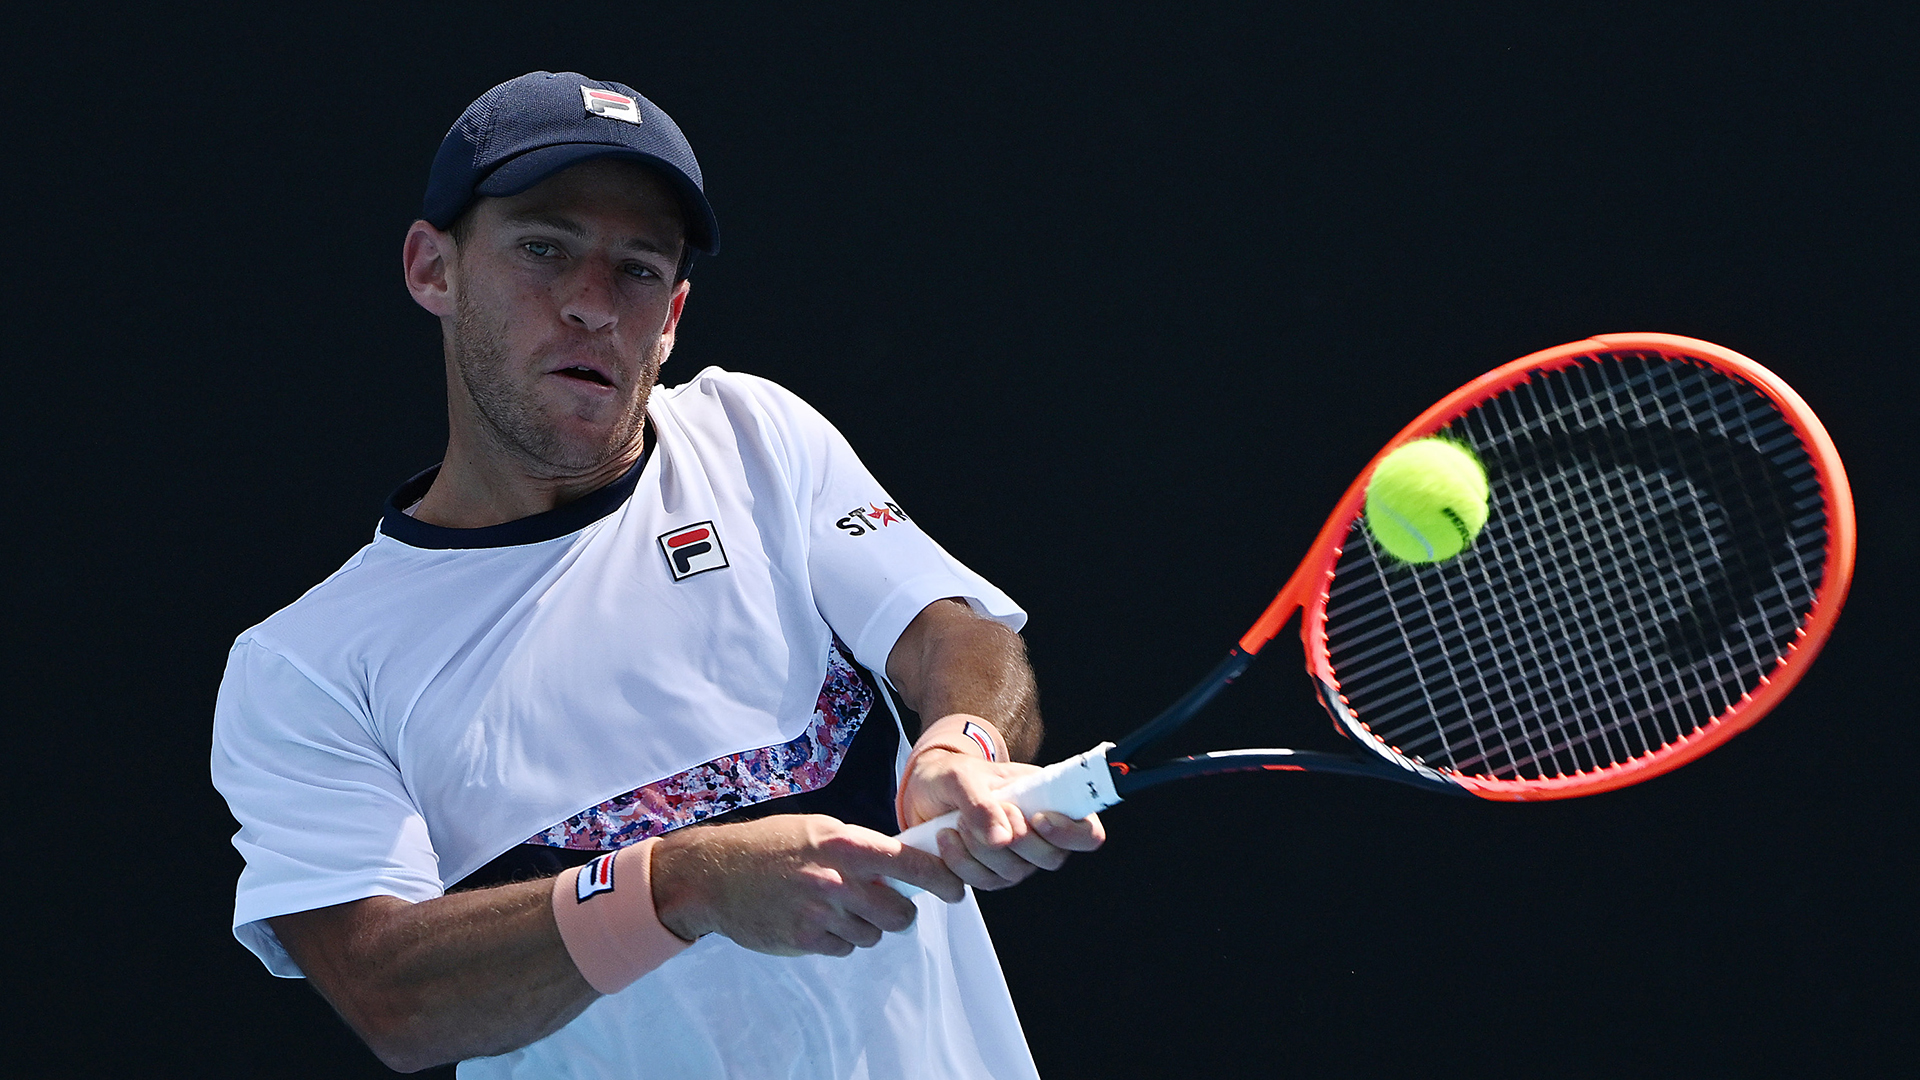 MELBOURNE, AUSTRALIA - JANUARY 17: Diego Schwartzman of Argentina plays a backhand in their round one singles match against Oleksii Krutykh of Ukraine during day two of the 2023 Australian Open at Melbourne Park on January 17, 2023 in Melbourne, Australia. (Photo by Quinn Rooney/Getty Images)